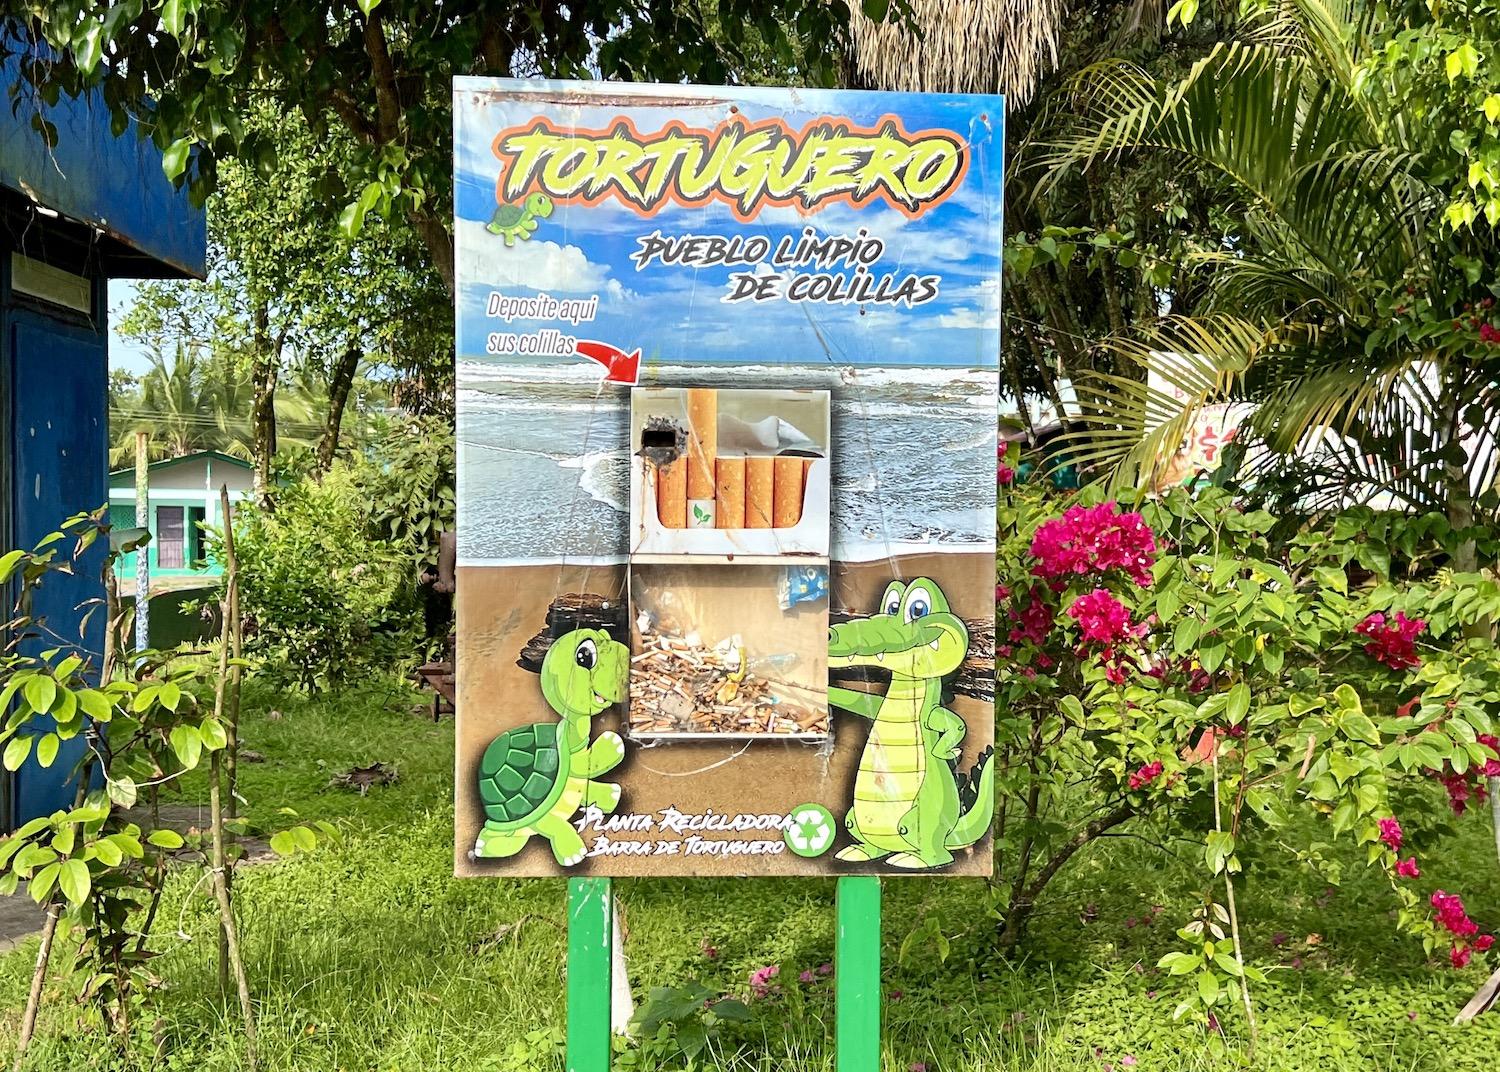 In the village of Tortuguero, smokers are asked to deposit cigarette butts in these containers.